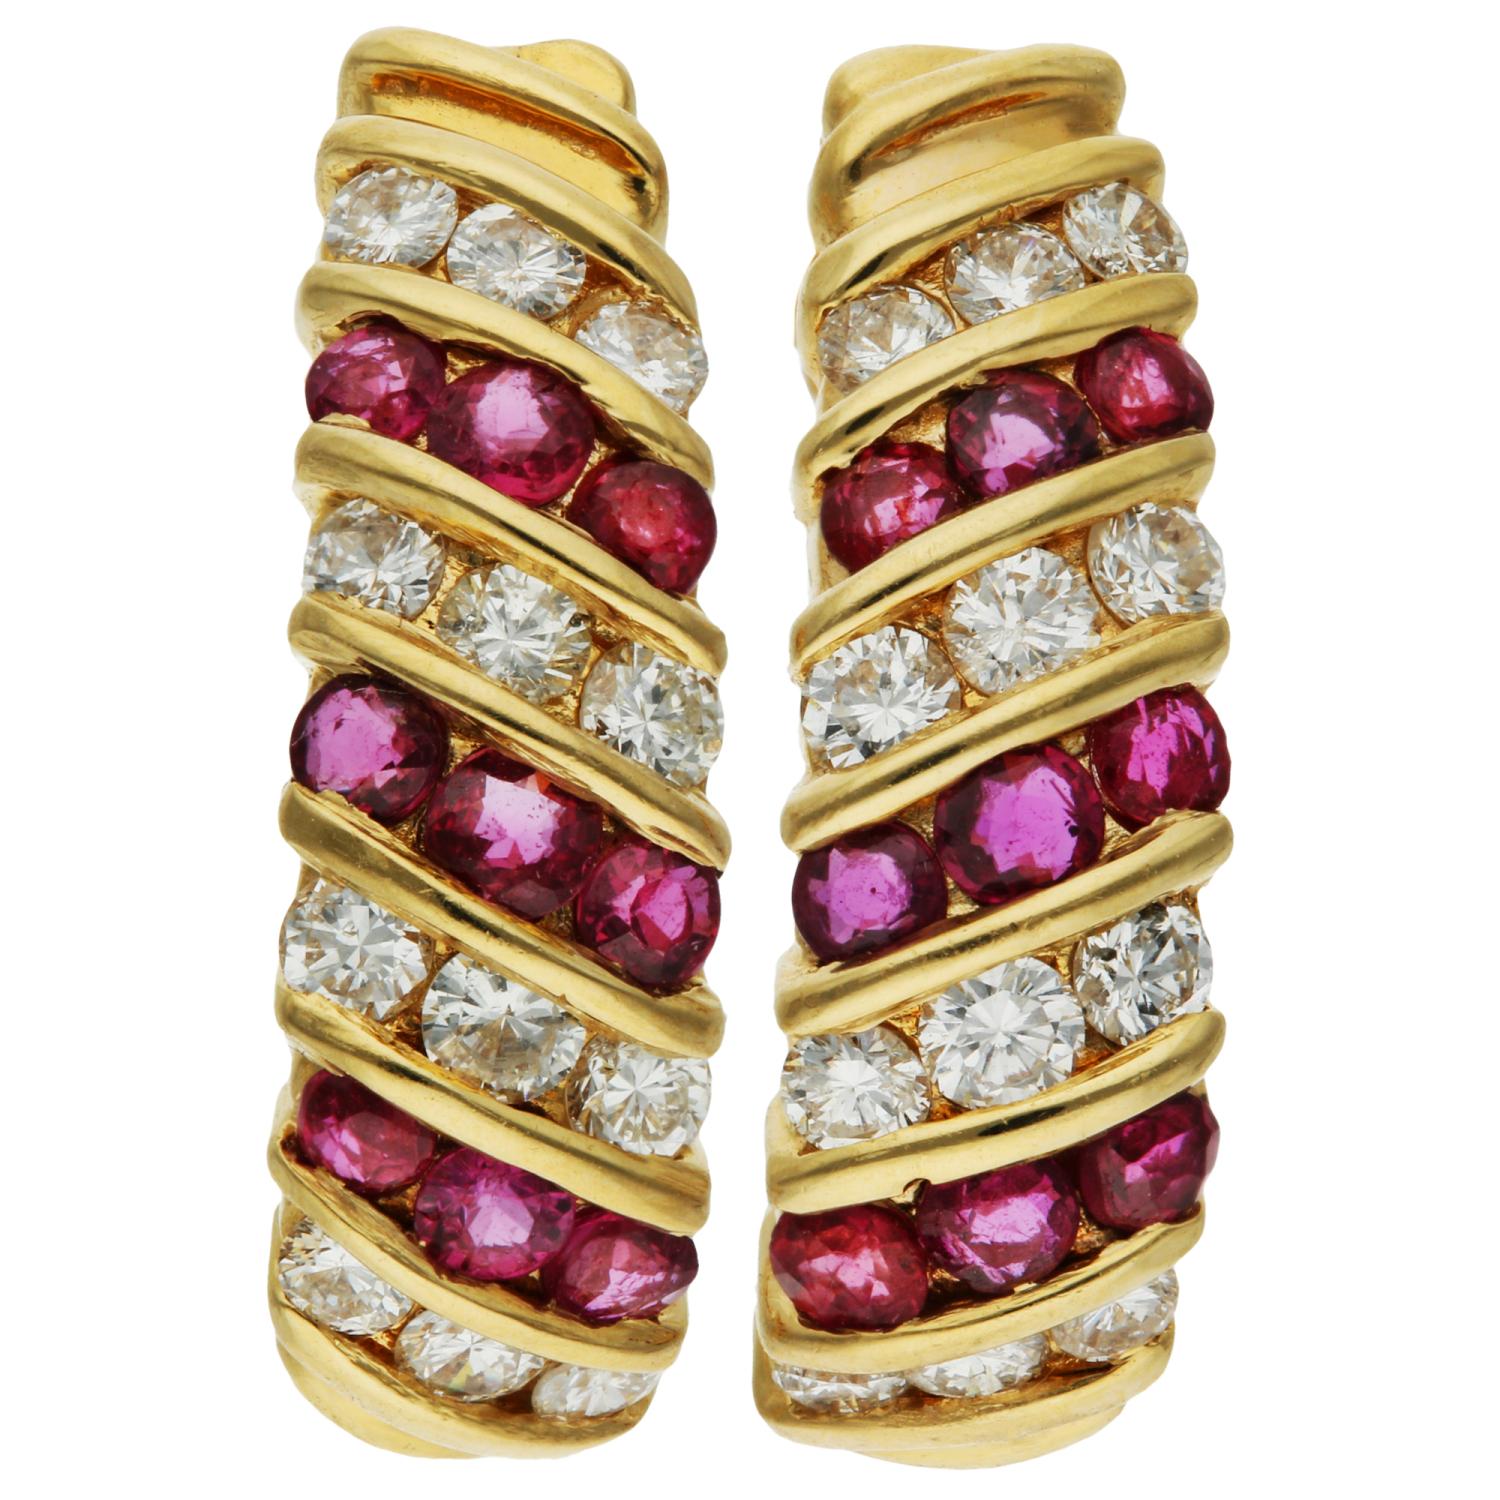 14ct Yellow Gold 0.60ct Ruby & 0.70ct Diamond Earrings

Elevate your elegance with our Pair of Pre-Owned 14ct Yellow Gold Ruby & Diamond Earrings, a striking display of timeless beauty and sophistication. Each earring is a graceful curve of 14ct